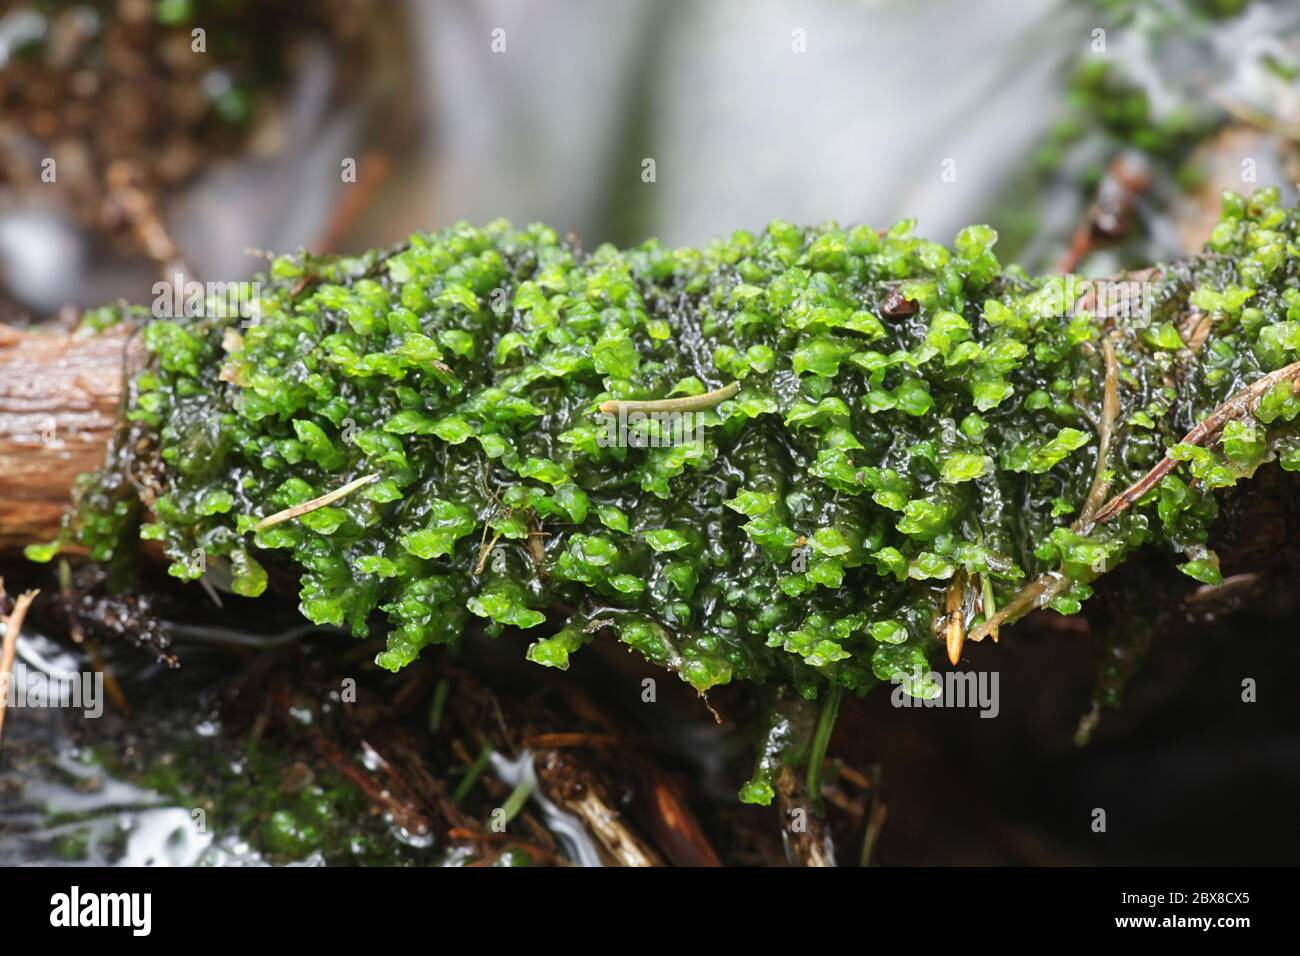 Scapania undulata, known as Water Earwort, a liverwort growing on forest streams in Finland Stock Photo